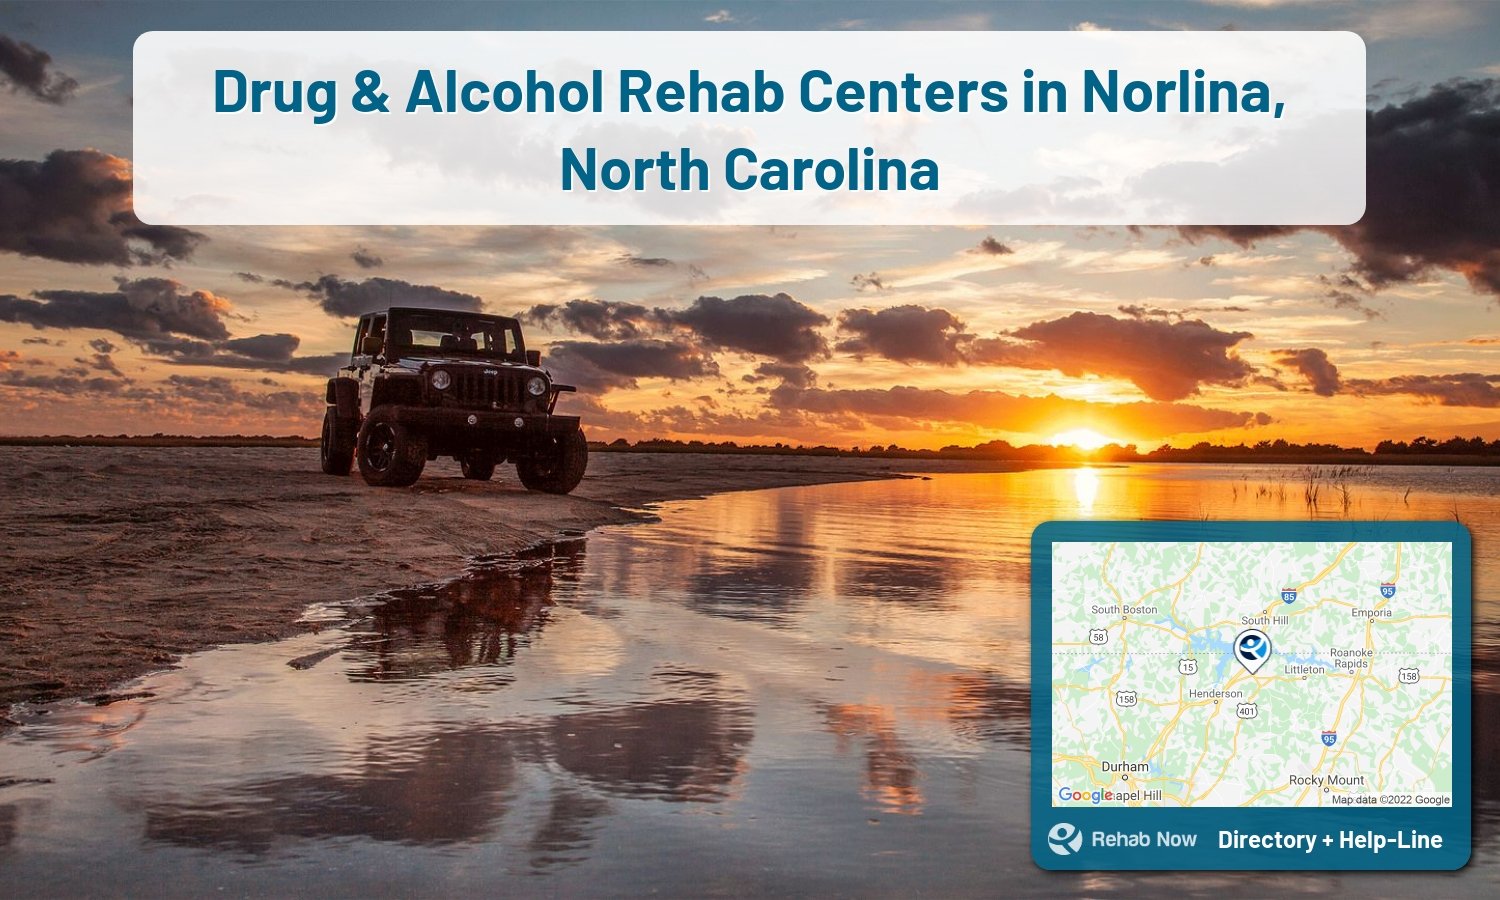 View options, availability, treatment methods, and more, for drug rehab and alcohol treatment in Norlina, North Carolina